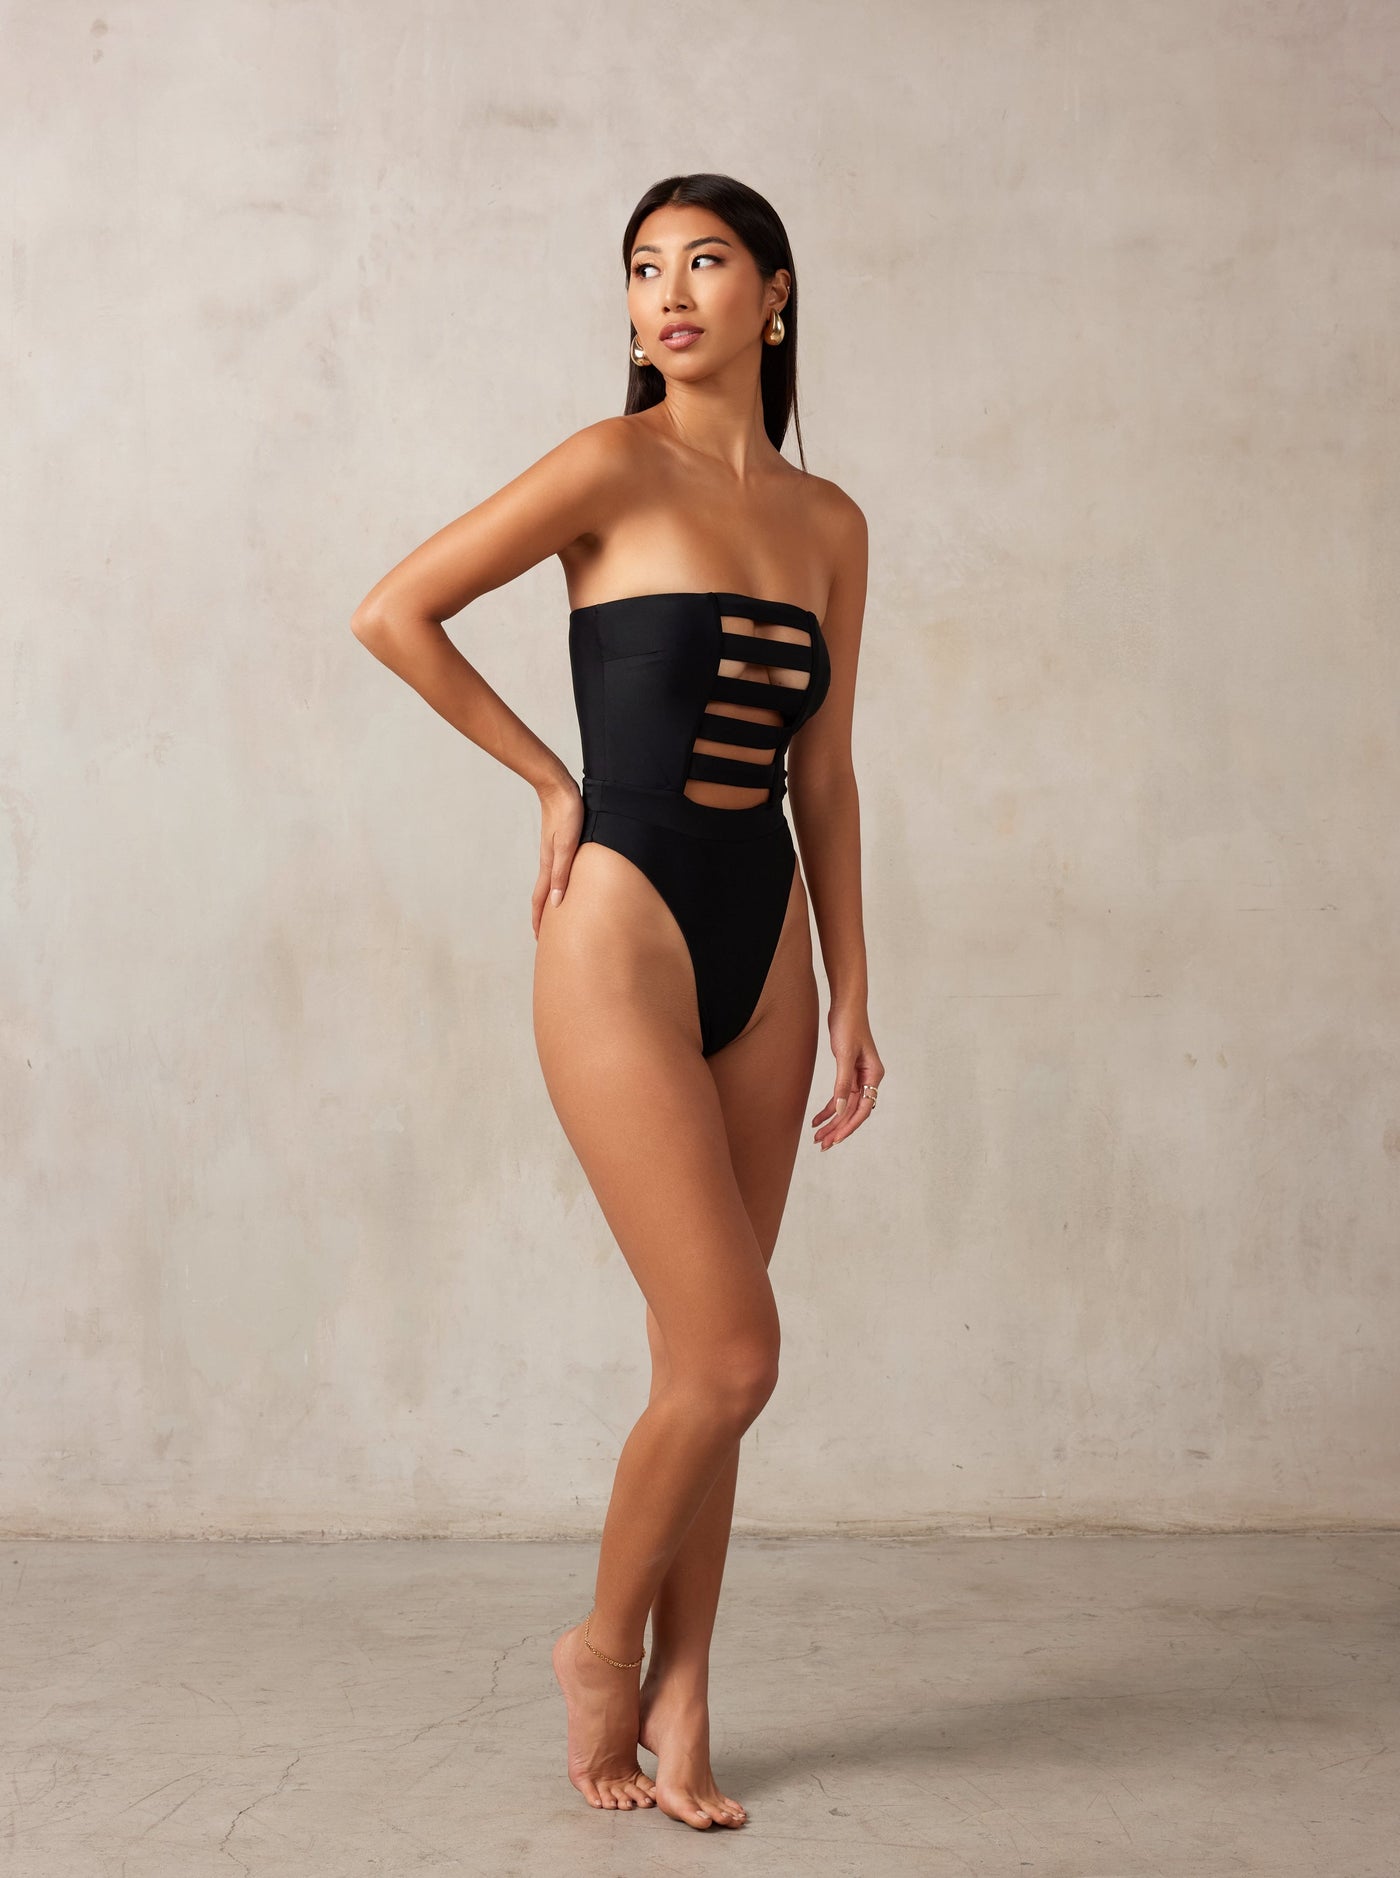 MBM Swim, Marcia B Maxwell high-cut Black cut-out one-piece swimsuit on beautiful asian model, black owned #color_black